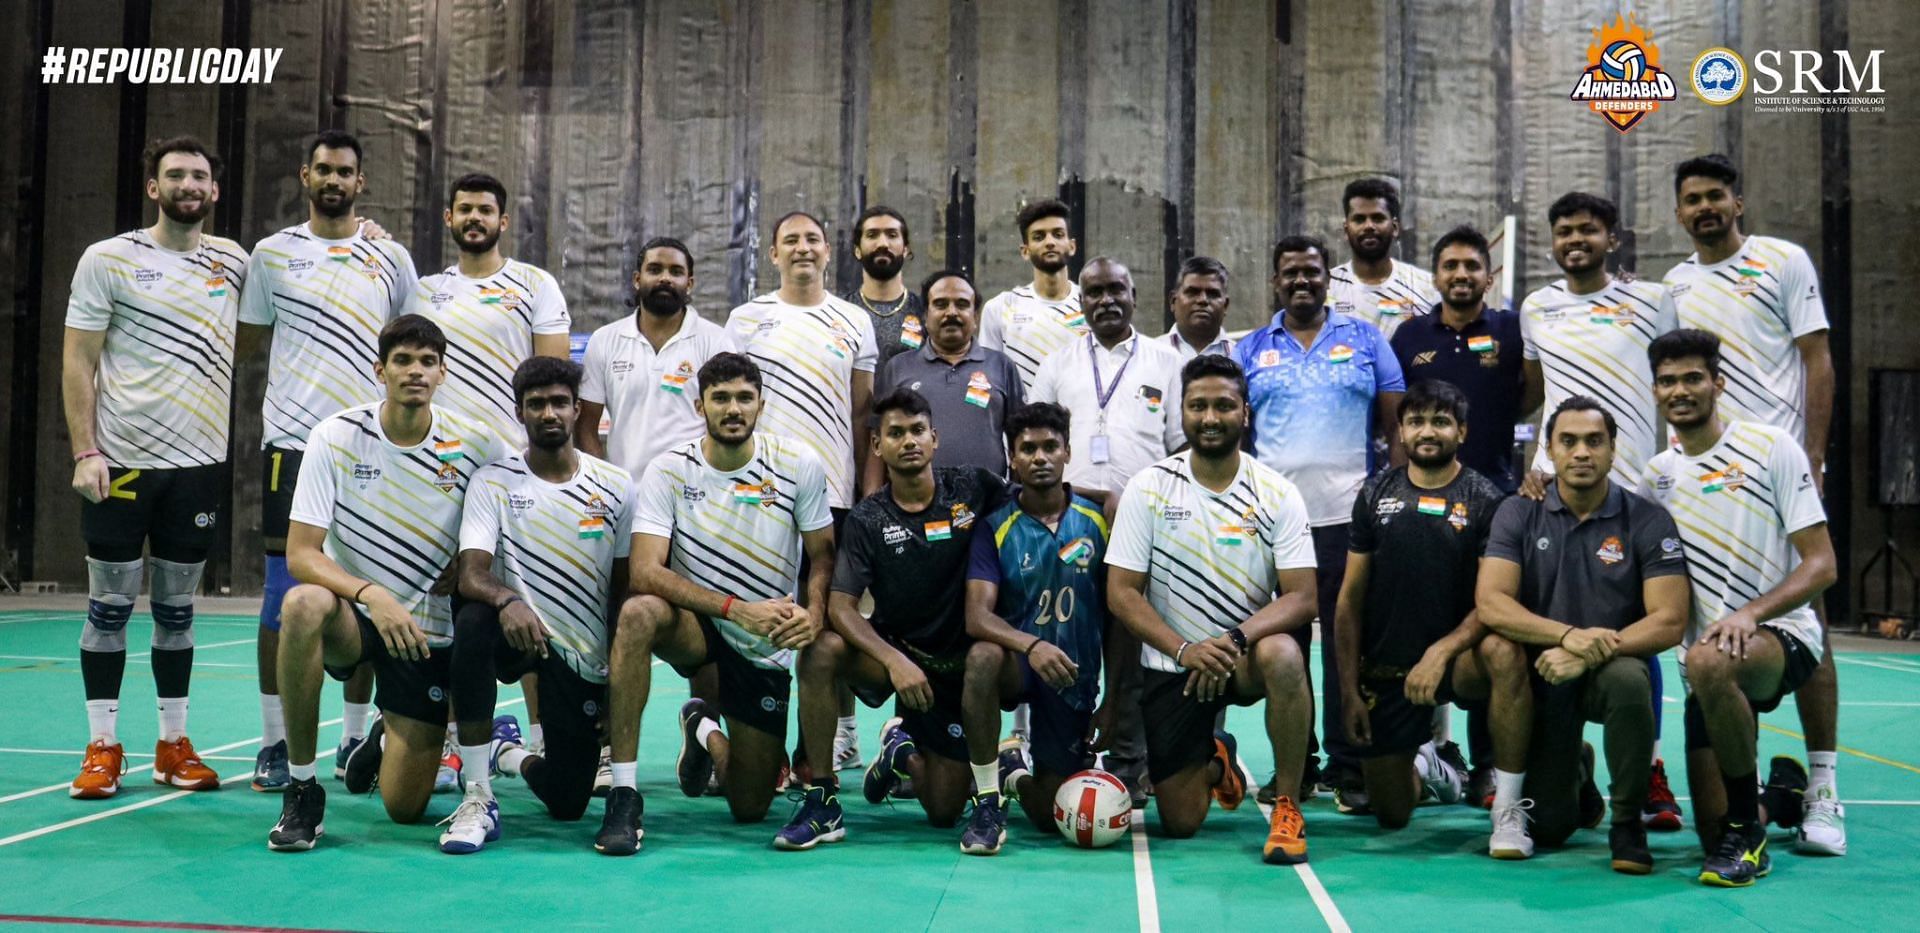 Ahmedabad Defenders team pose before a game (Image Courtesy: Twitter/Ahmedabad Defenders)